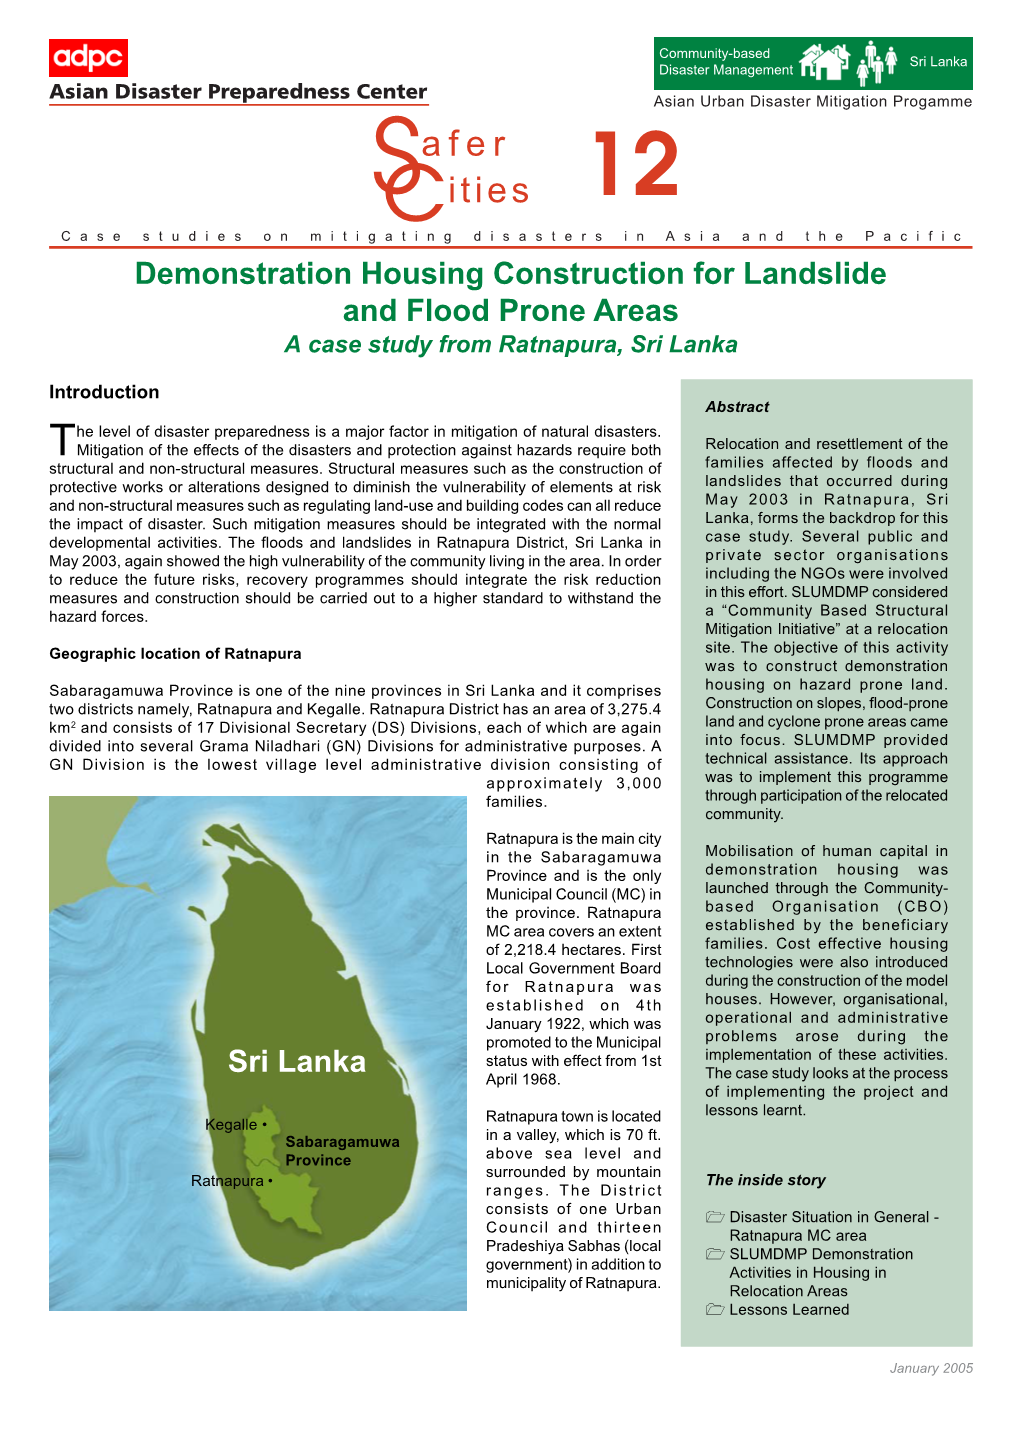 Demonstration Housing Construction for Landslide and Flood Prone Areas a Case Study from Ratnapura, Sri Lanka